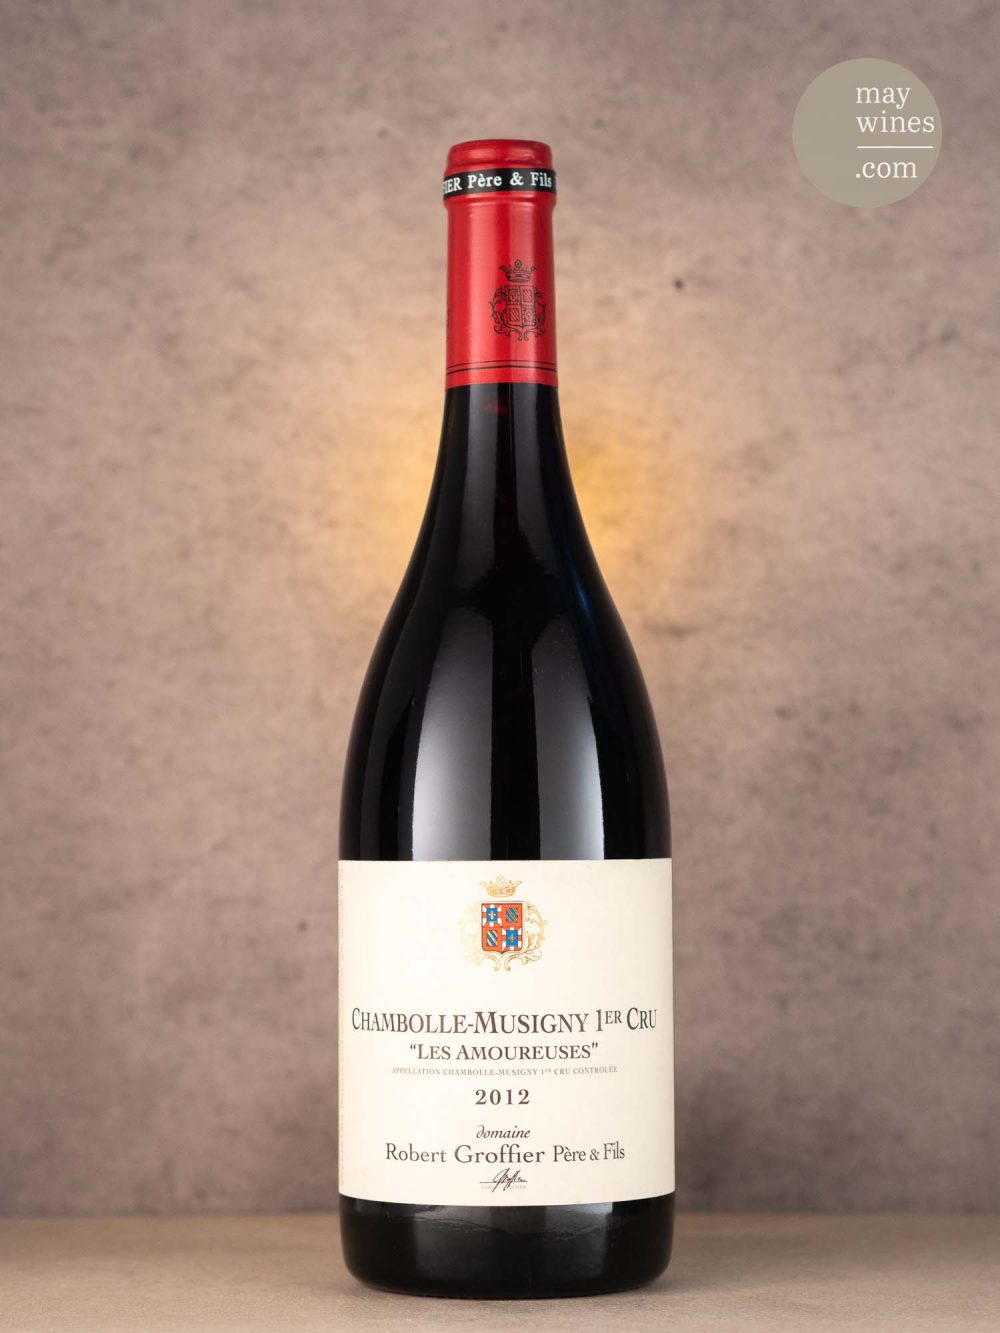 May Wines – Rotwein – 2012 Chambolle-Musigny Les Amoureuses Premier Cru - Domaine Robert Groffier Père & Fils